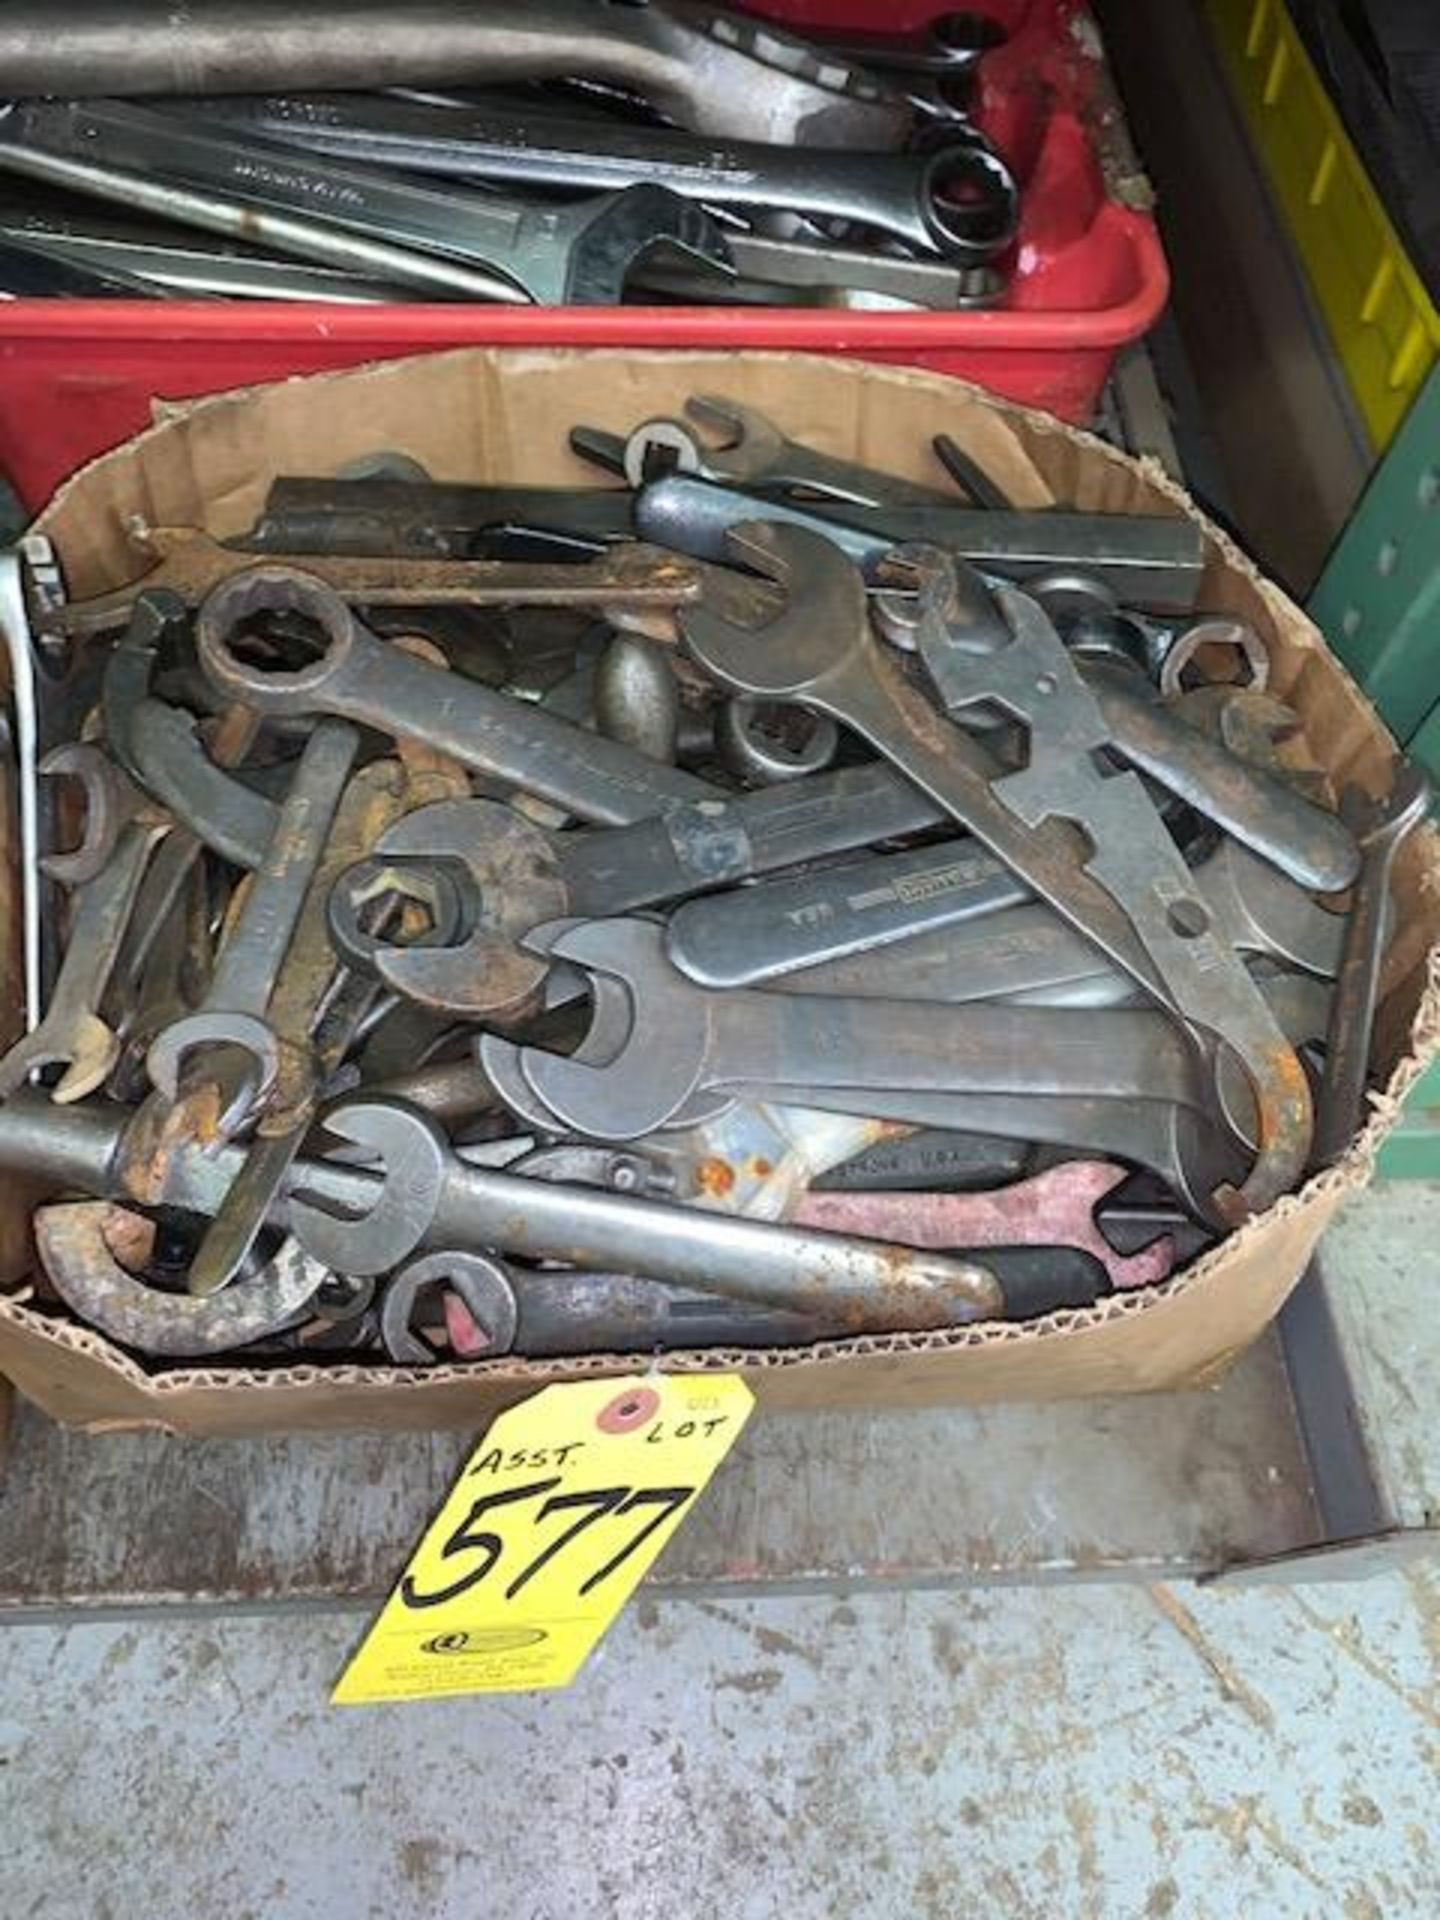 ASSORTED WRENCHES (BOTTOM SHELF OF LOT 554 - LEFT SIDE)